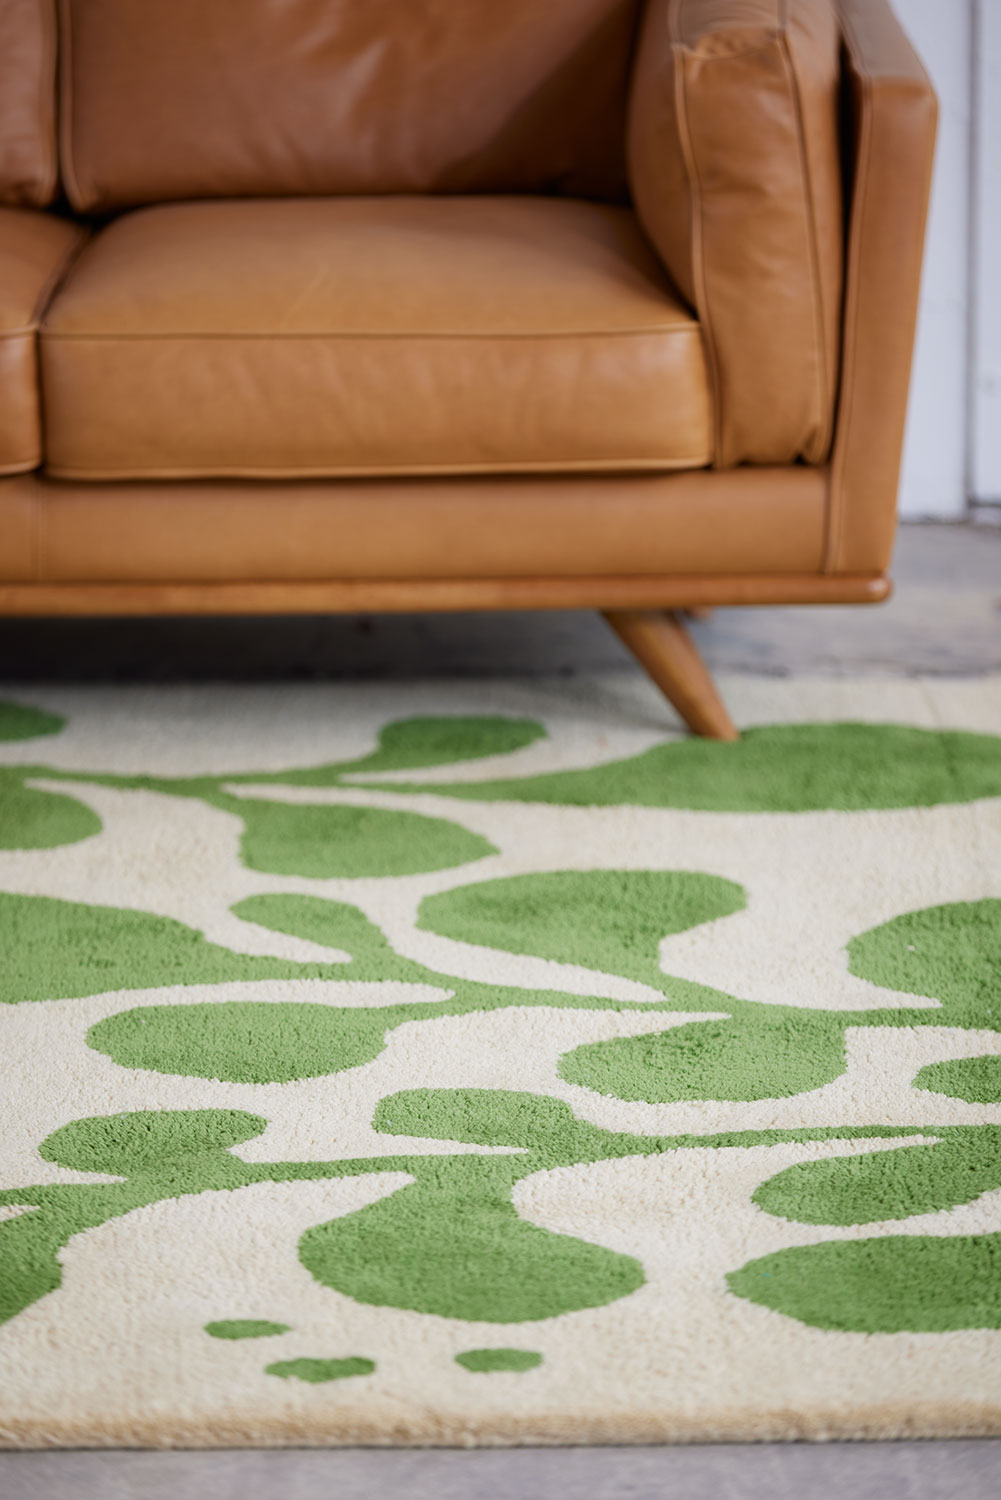 A brown leather chair sits on a neutral and green area rug with abstract designs on it called Vine Mambo